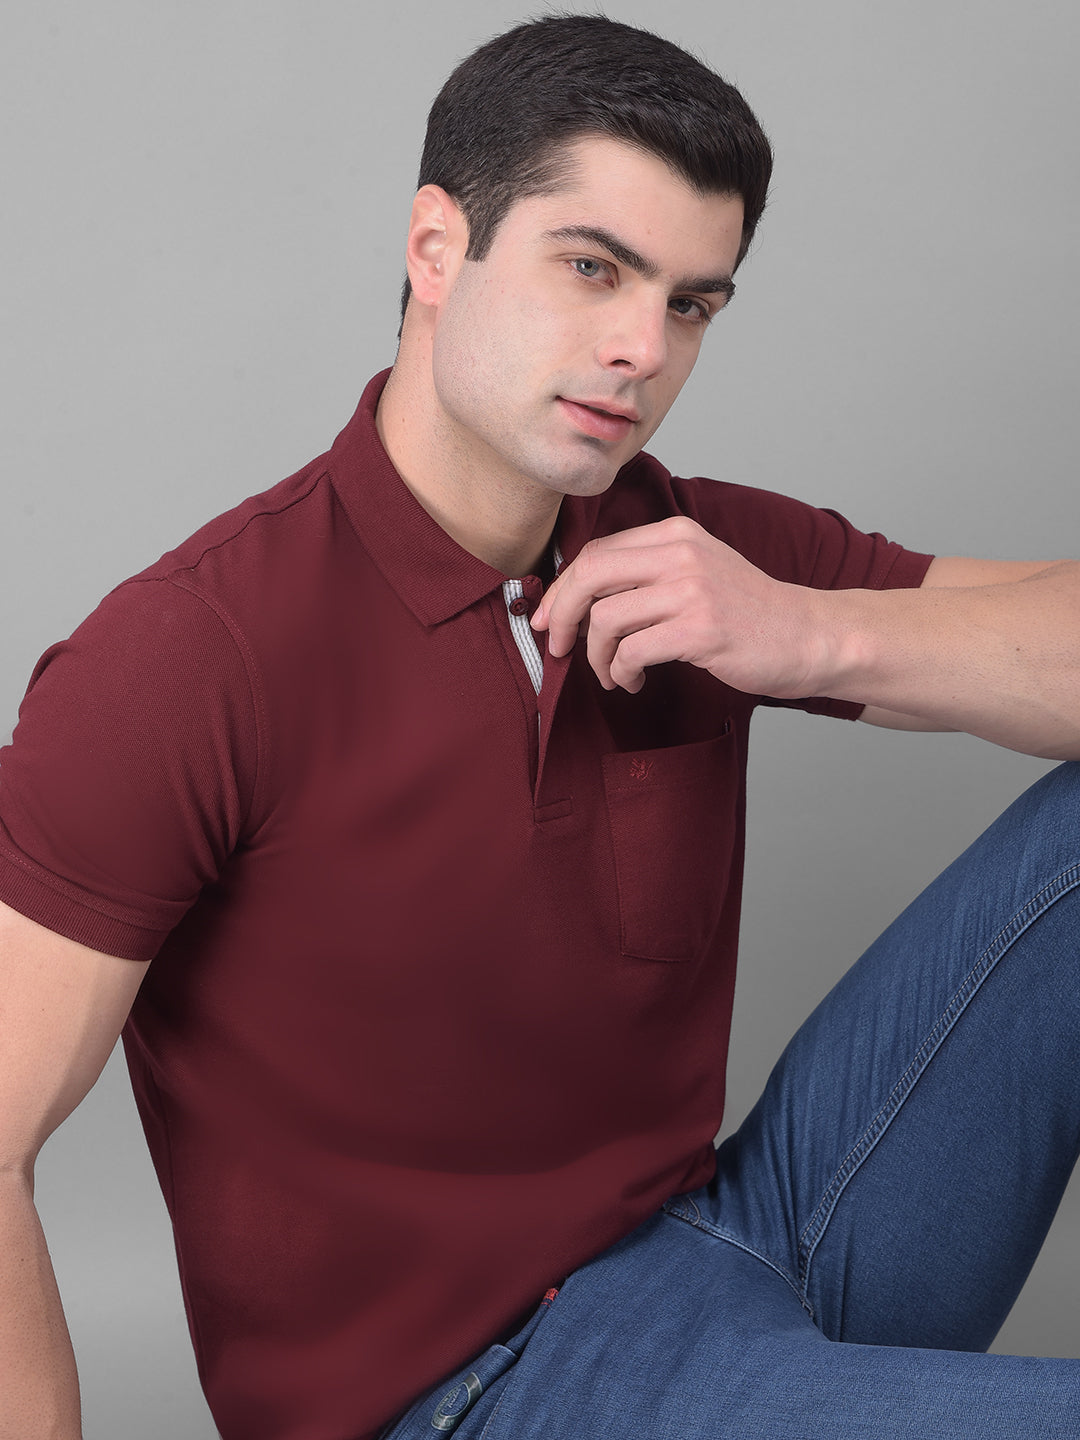 COBB SOLID WINE POLO NECK T-SHIRT